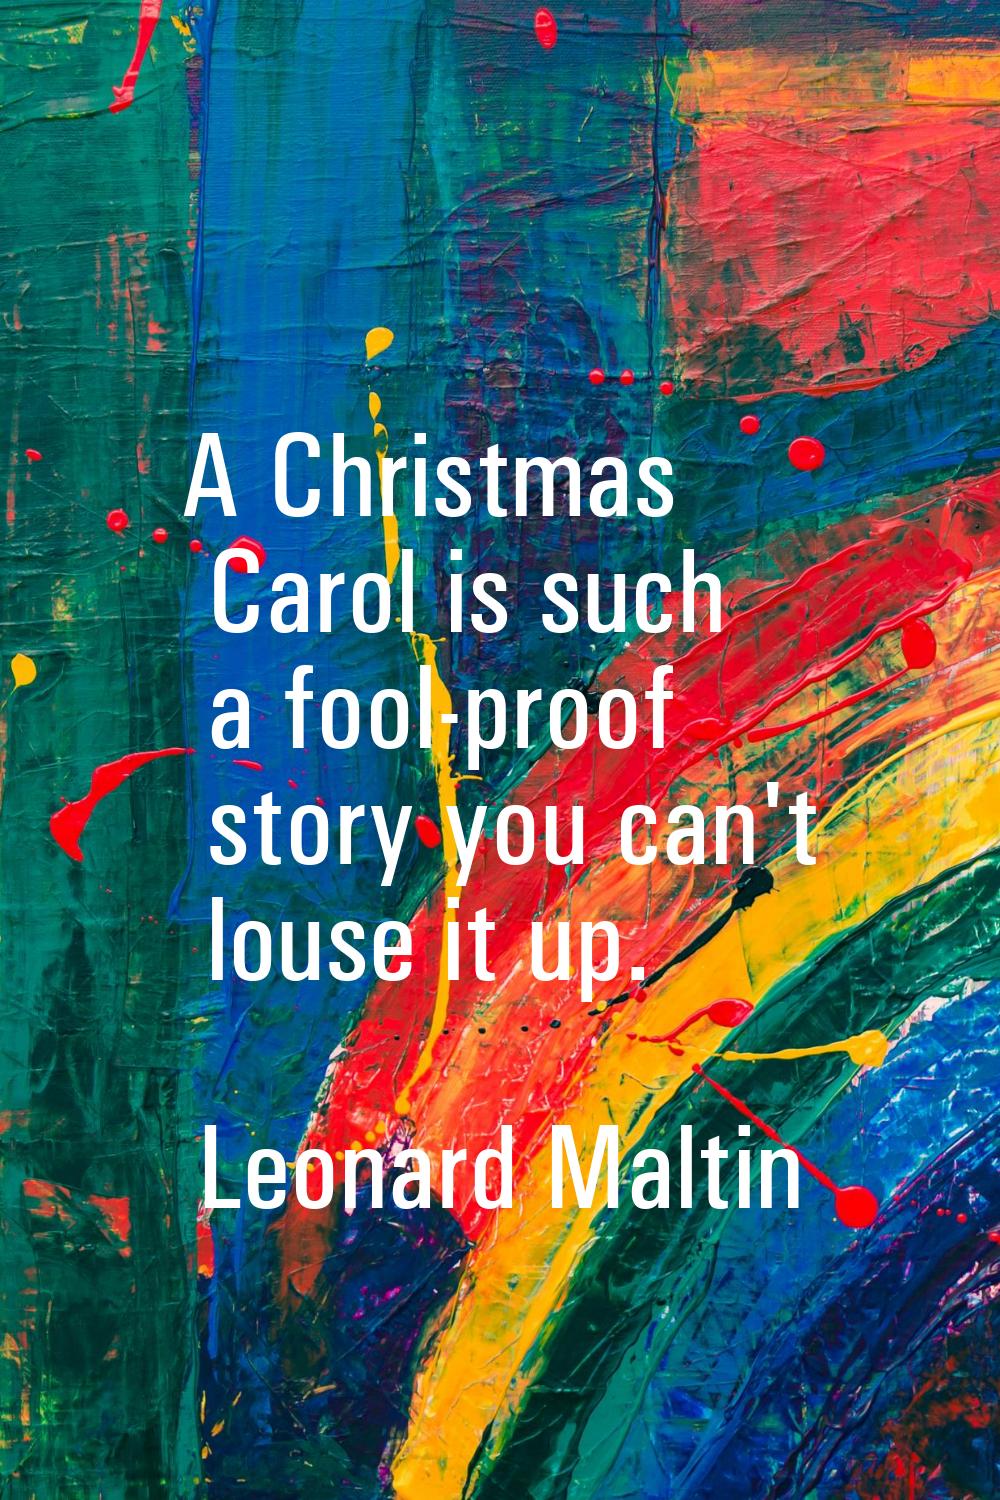 A Christmas Carol is such a fool-proof story you can't louse it up.